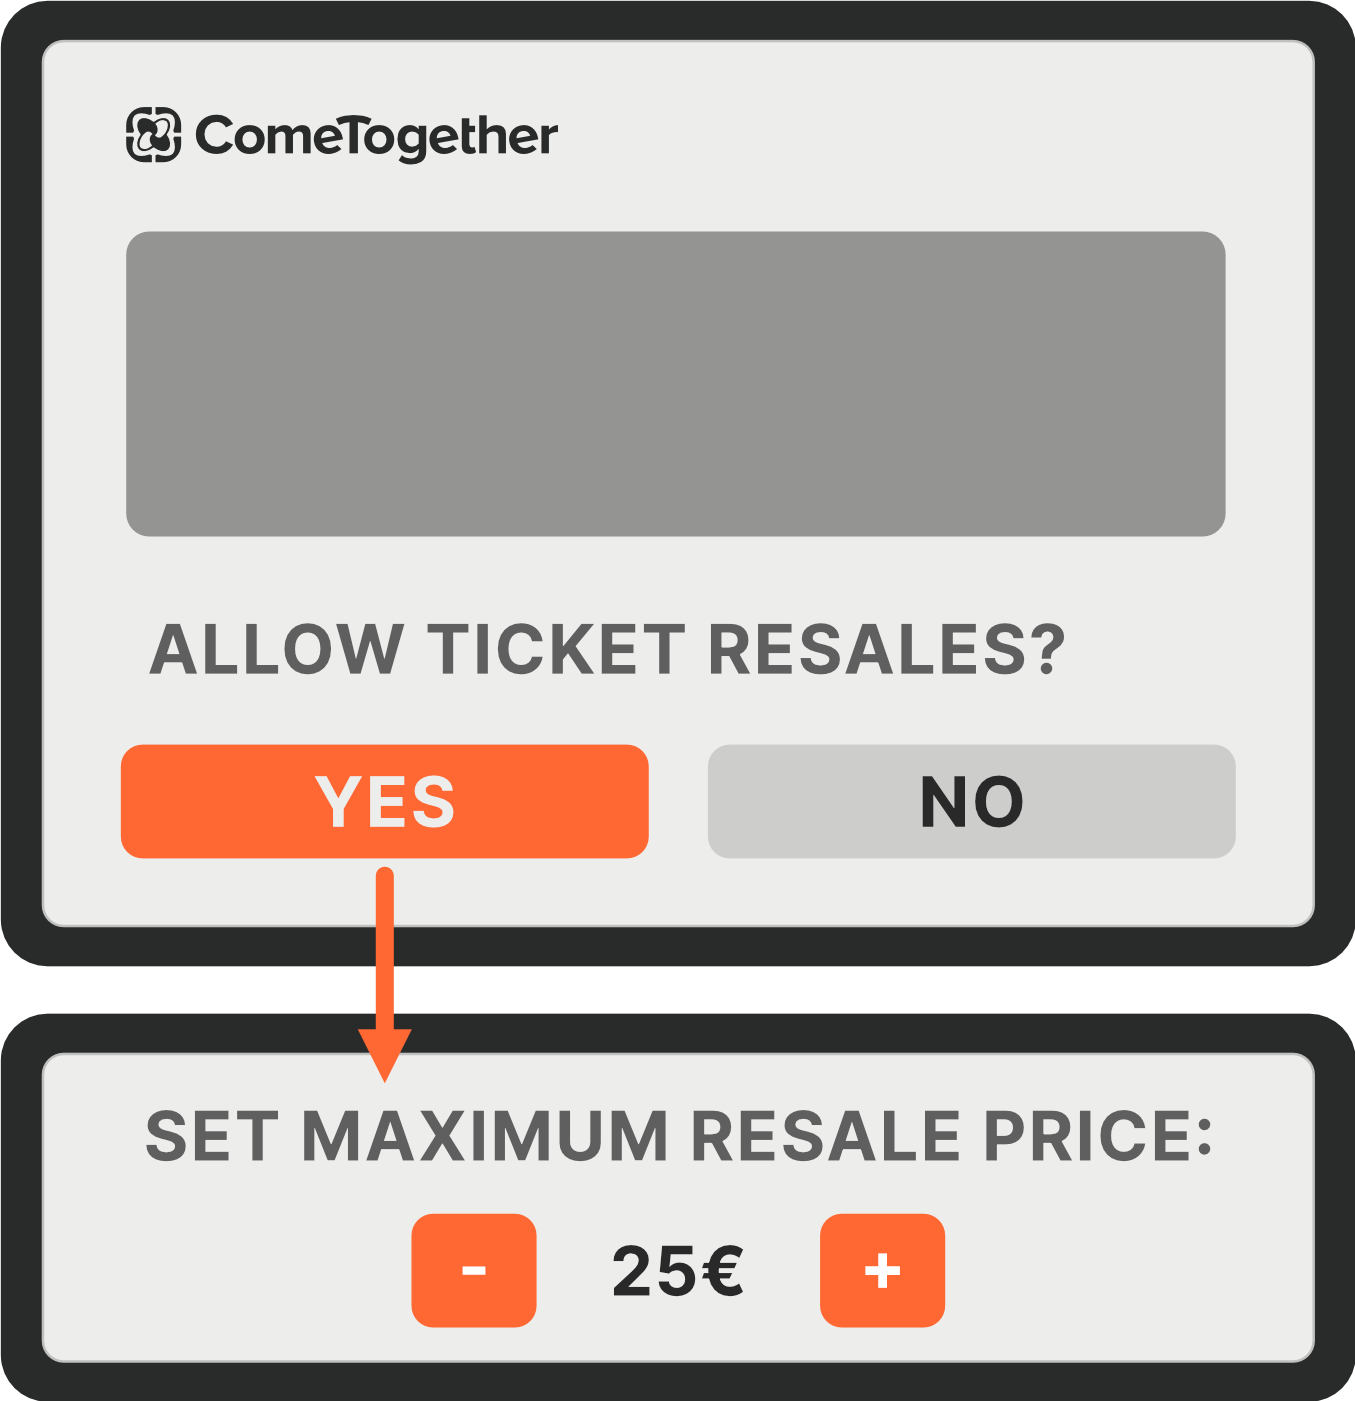 Visual of the ComeTogether event organizer's dashboard displaying the option of allowing ticket resales with a yes and now button below. The yes button is highlighted and an arrow starts from it pointing a new box that says "set maximum resale price with the 25€ price displayed below among two square buttons, minus on the left and plus on the right"